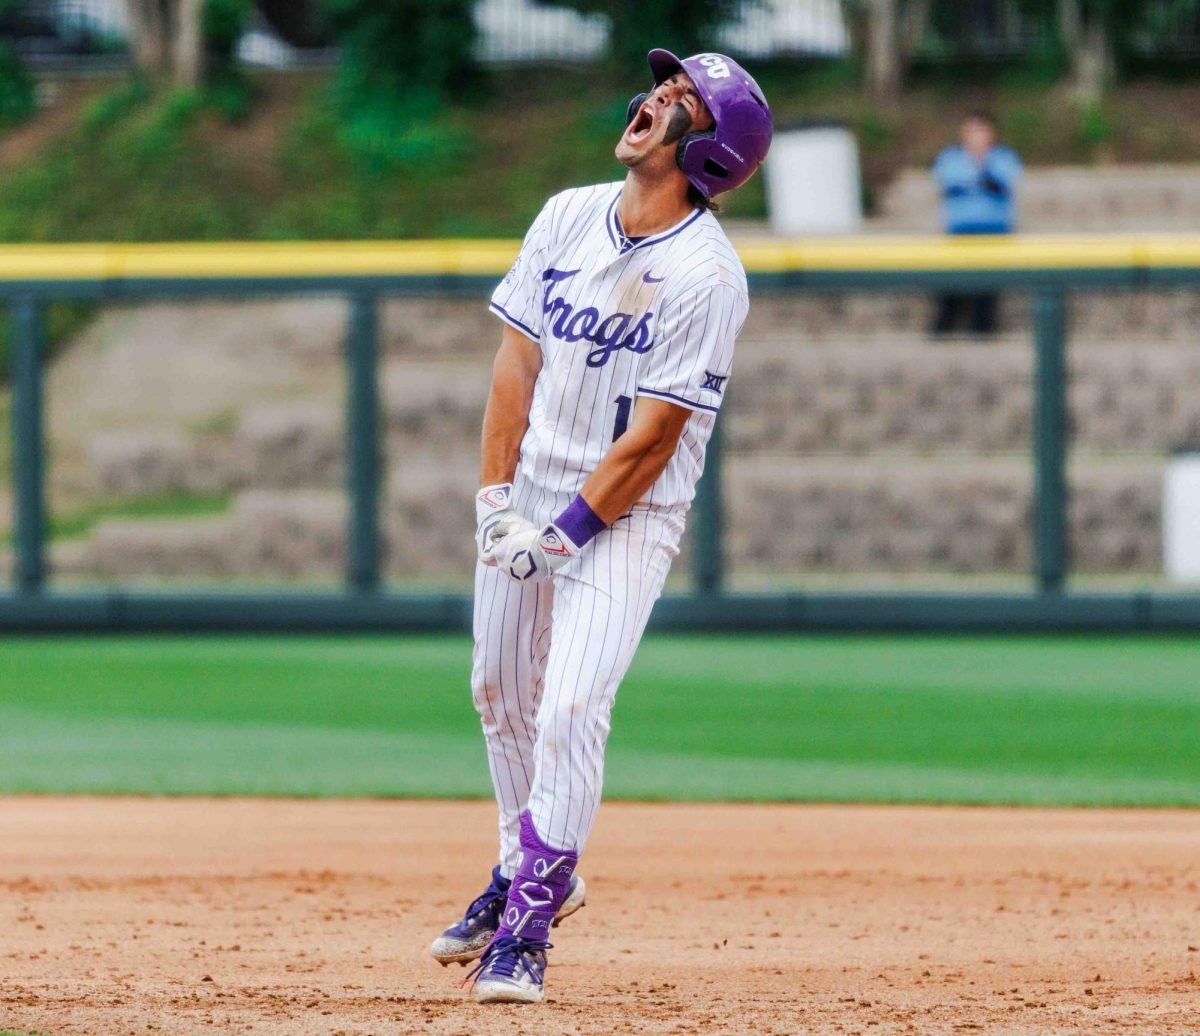 TCU third basemen Peyton Chatagnier celebrates after driving in a run at Lupton Stadium in Fort Worth, Texas on April 27th, 2024. The TCU Horned Frogs beat the Kansas State Wildcats 7-4 in game 1 of the doubleheader. (TCU360/Tyler Chan)